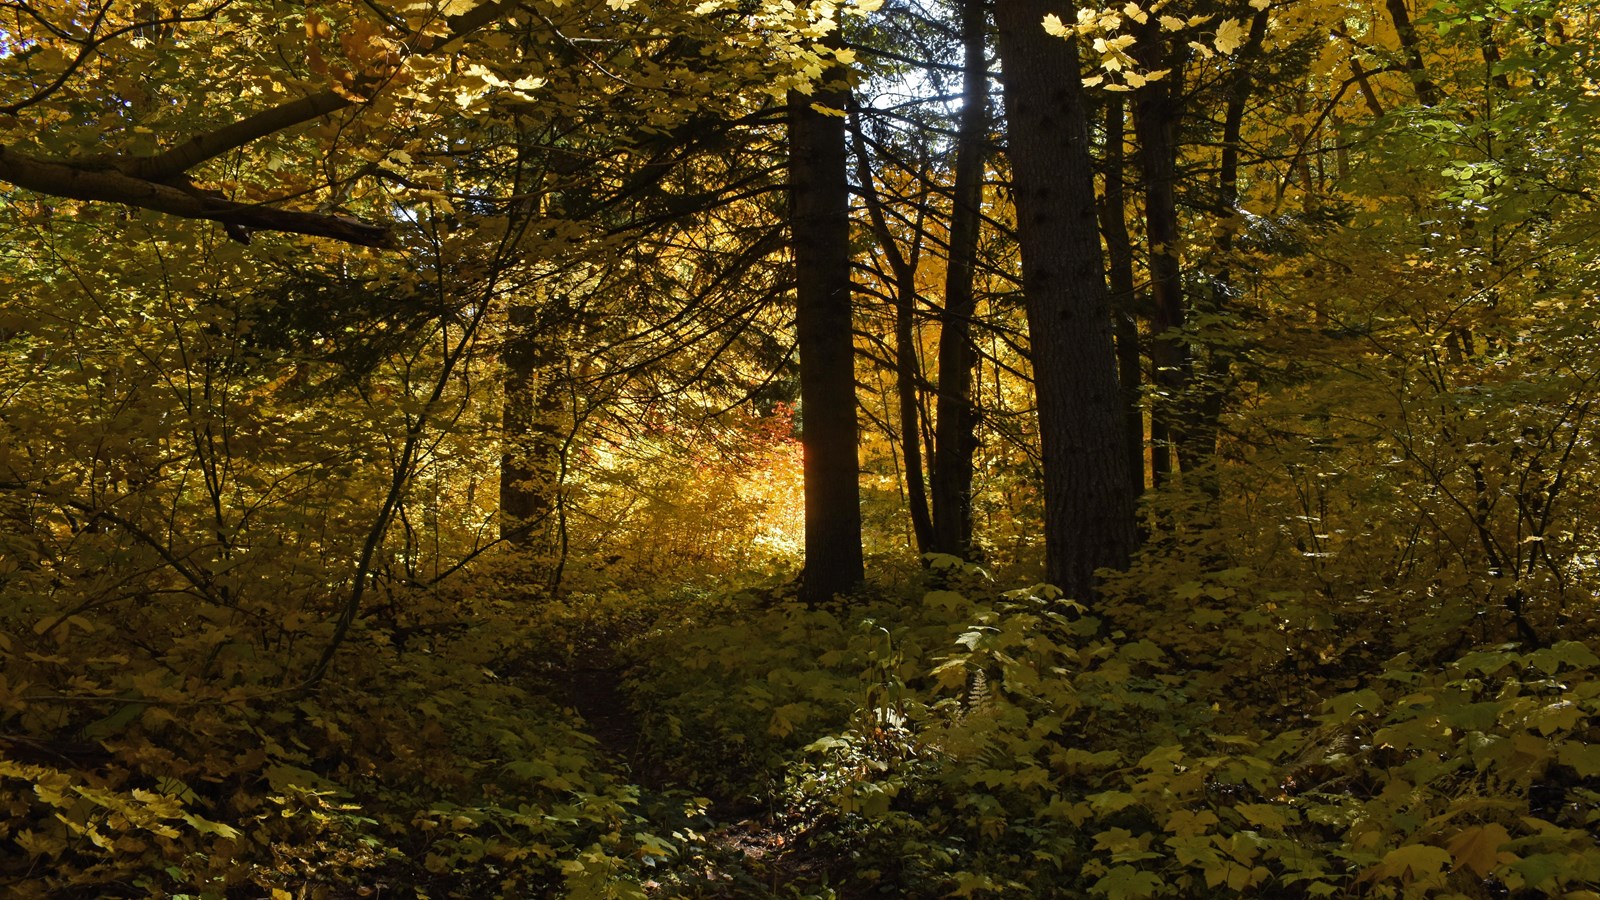 A thin dirt path winds through a forest of deciduous trees turning yellow and gold in the fall.